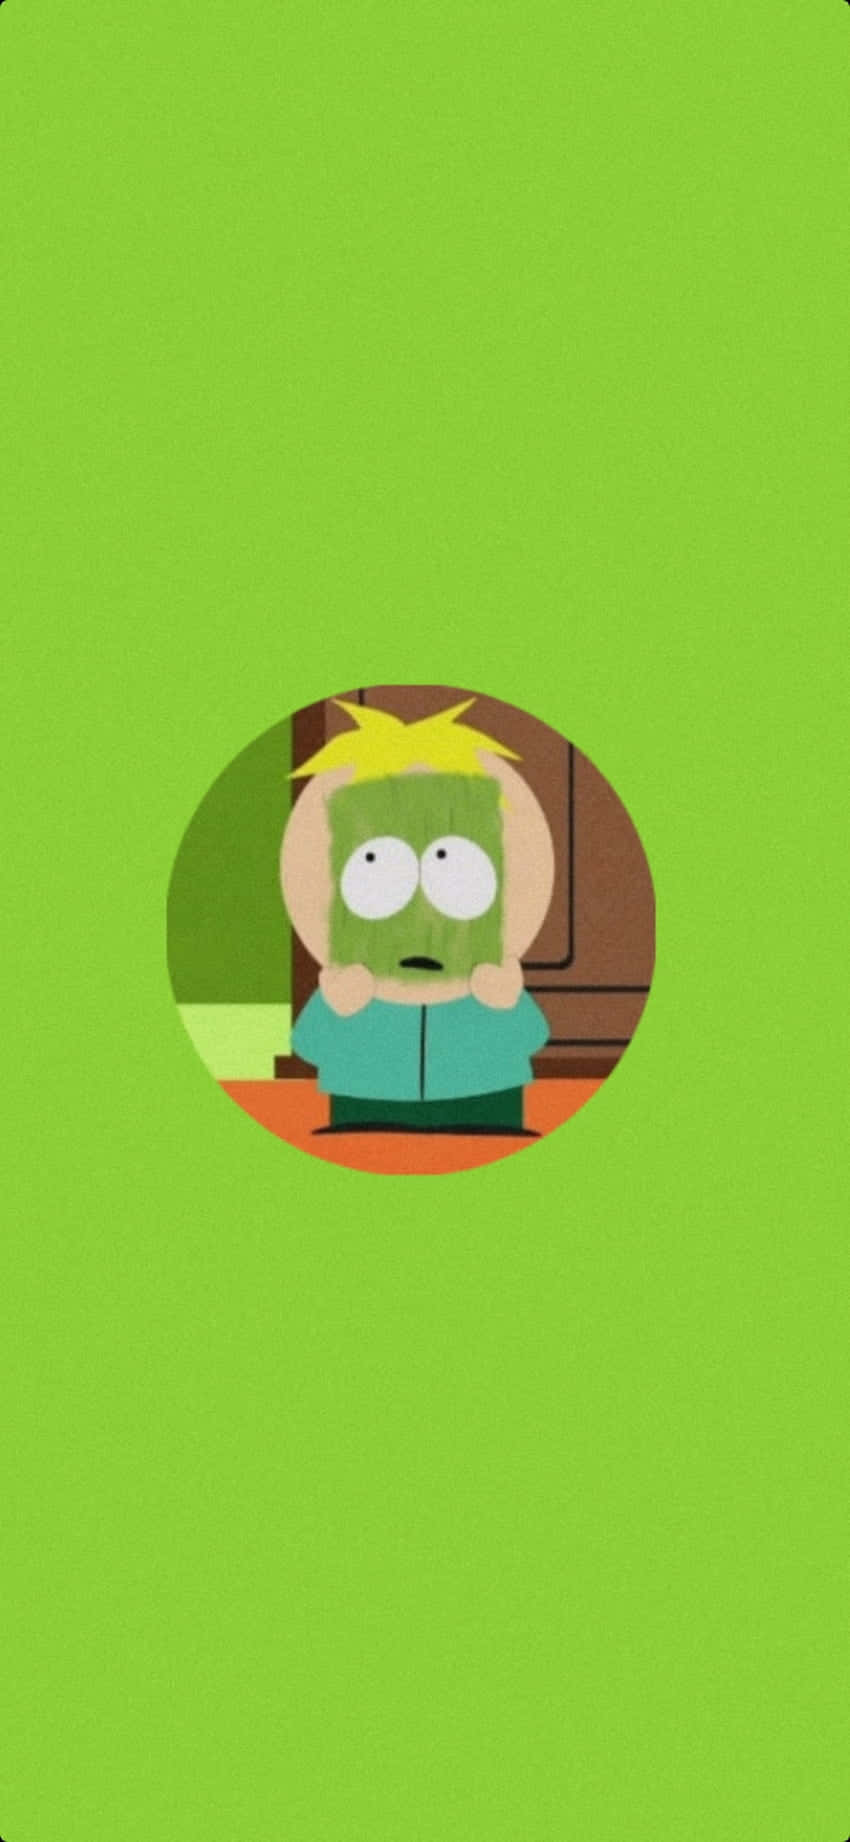 Butters Stotch Surprised Expression Wallpaper